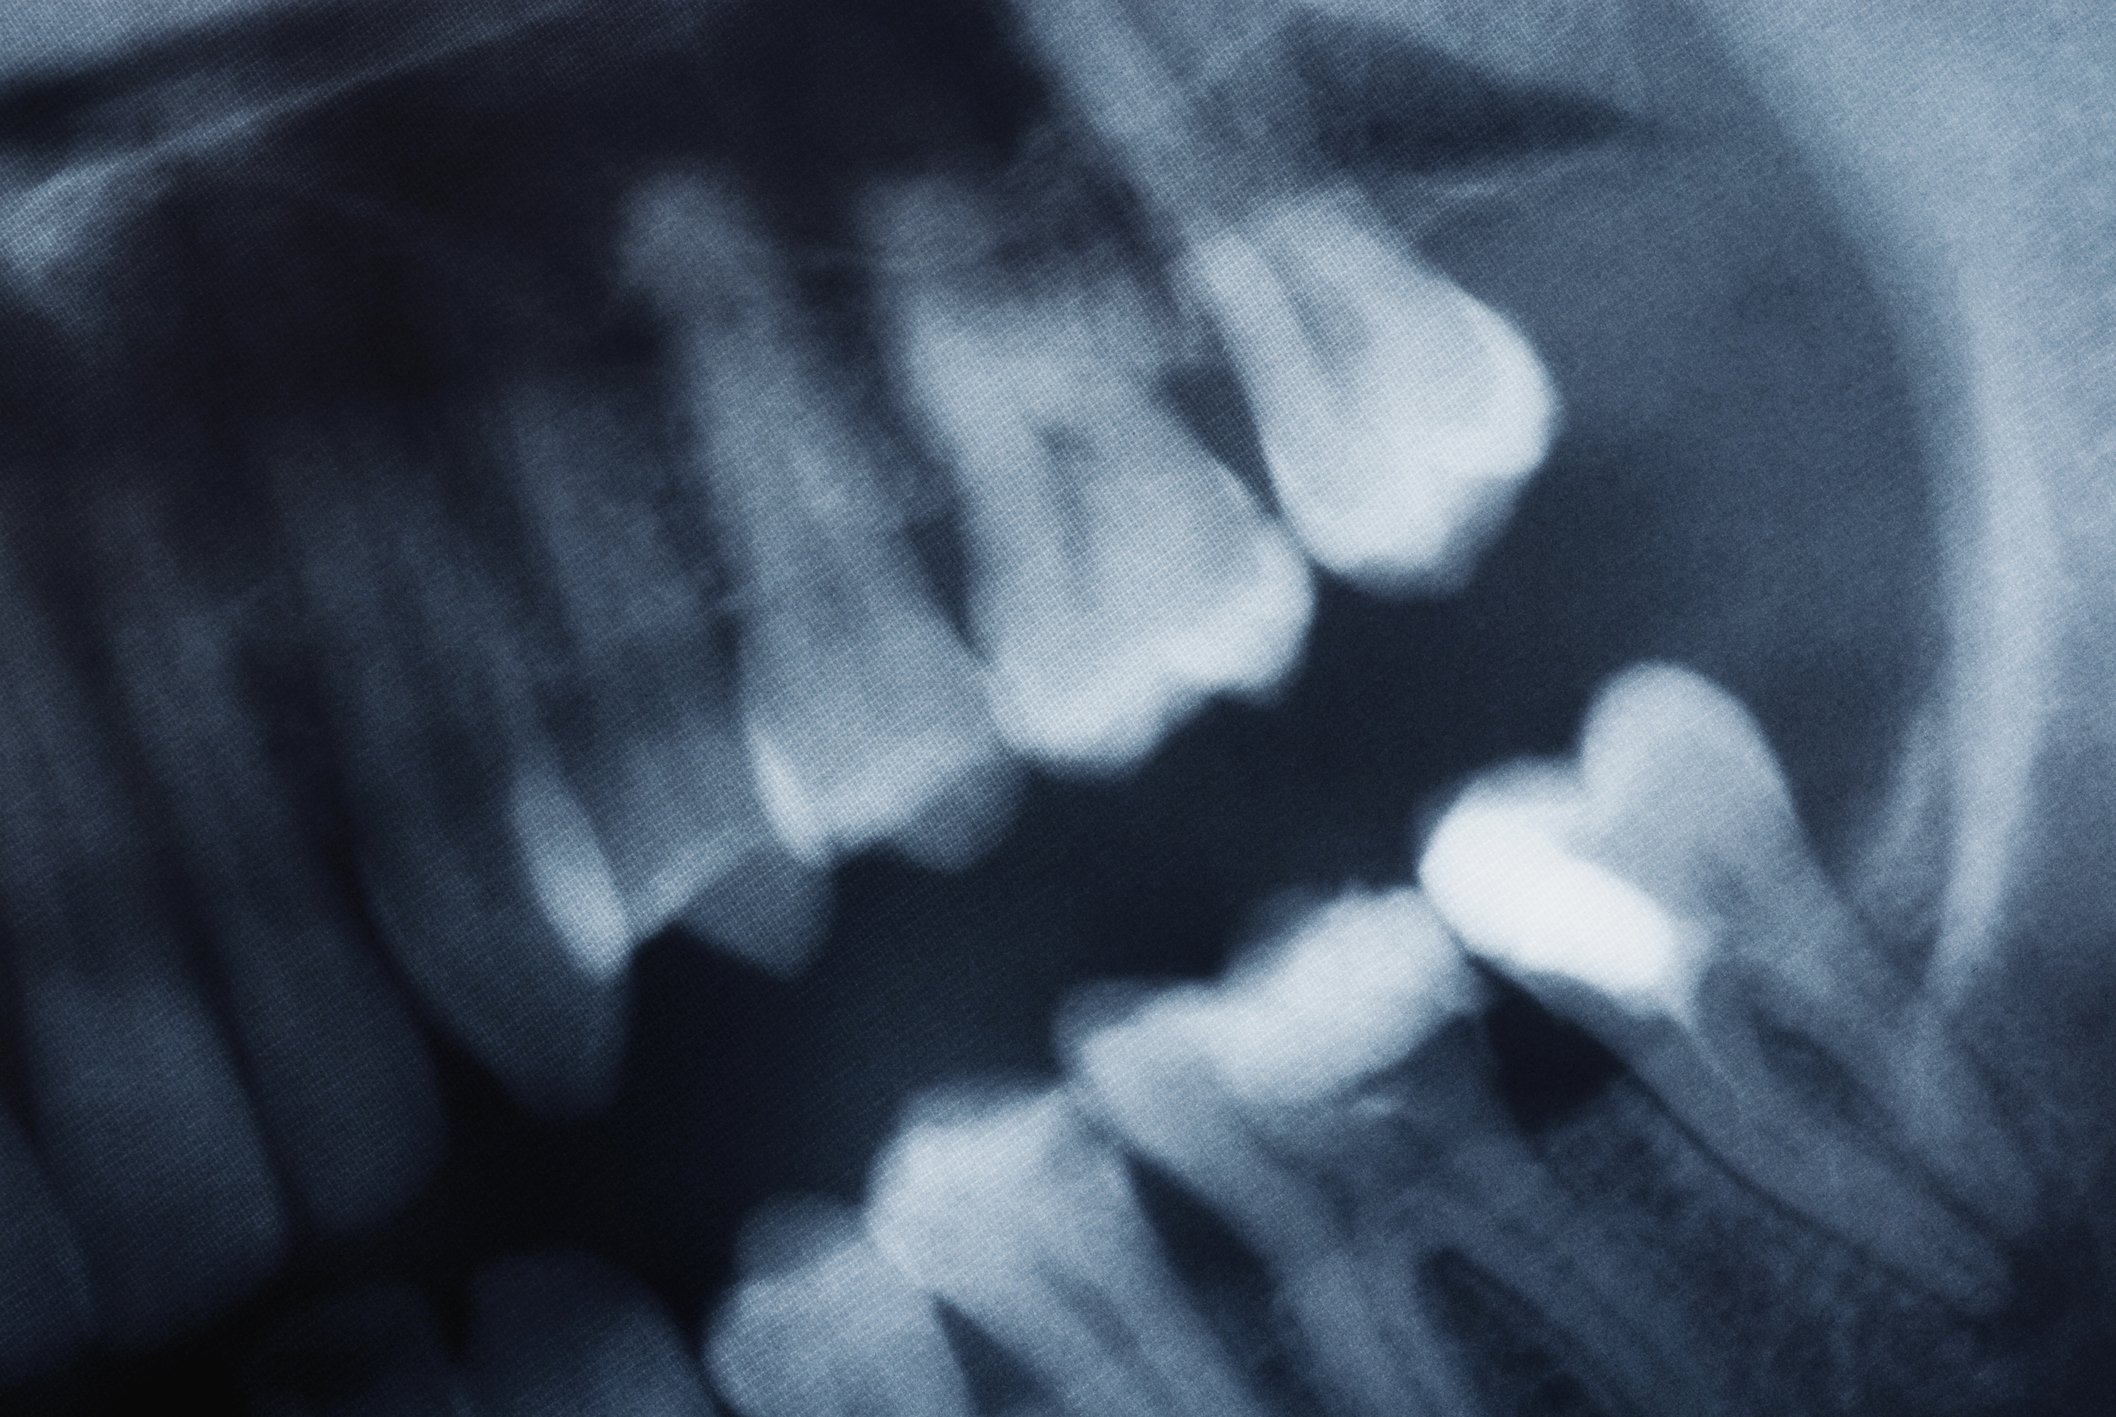 Dental X-ray showing a close-up of human teeth, commonly shared as an intriguing internet find